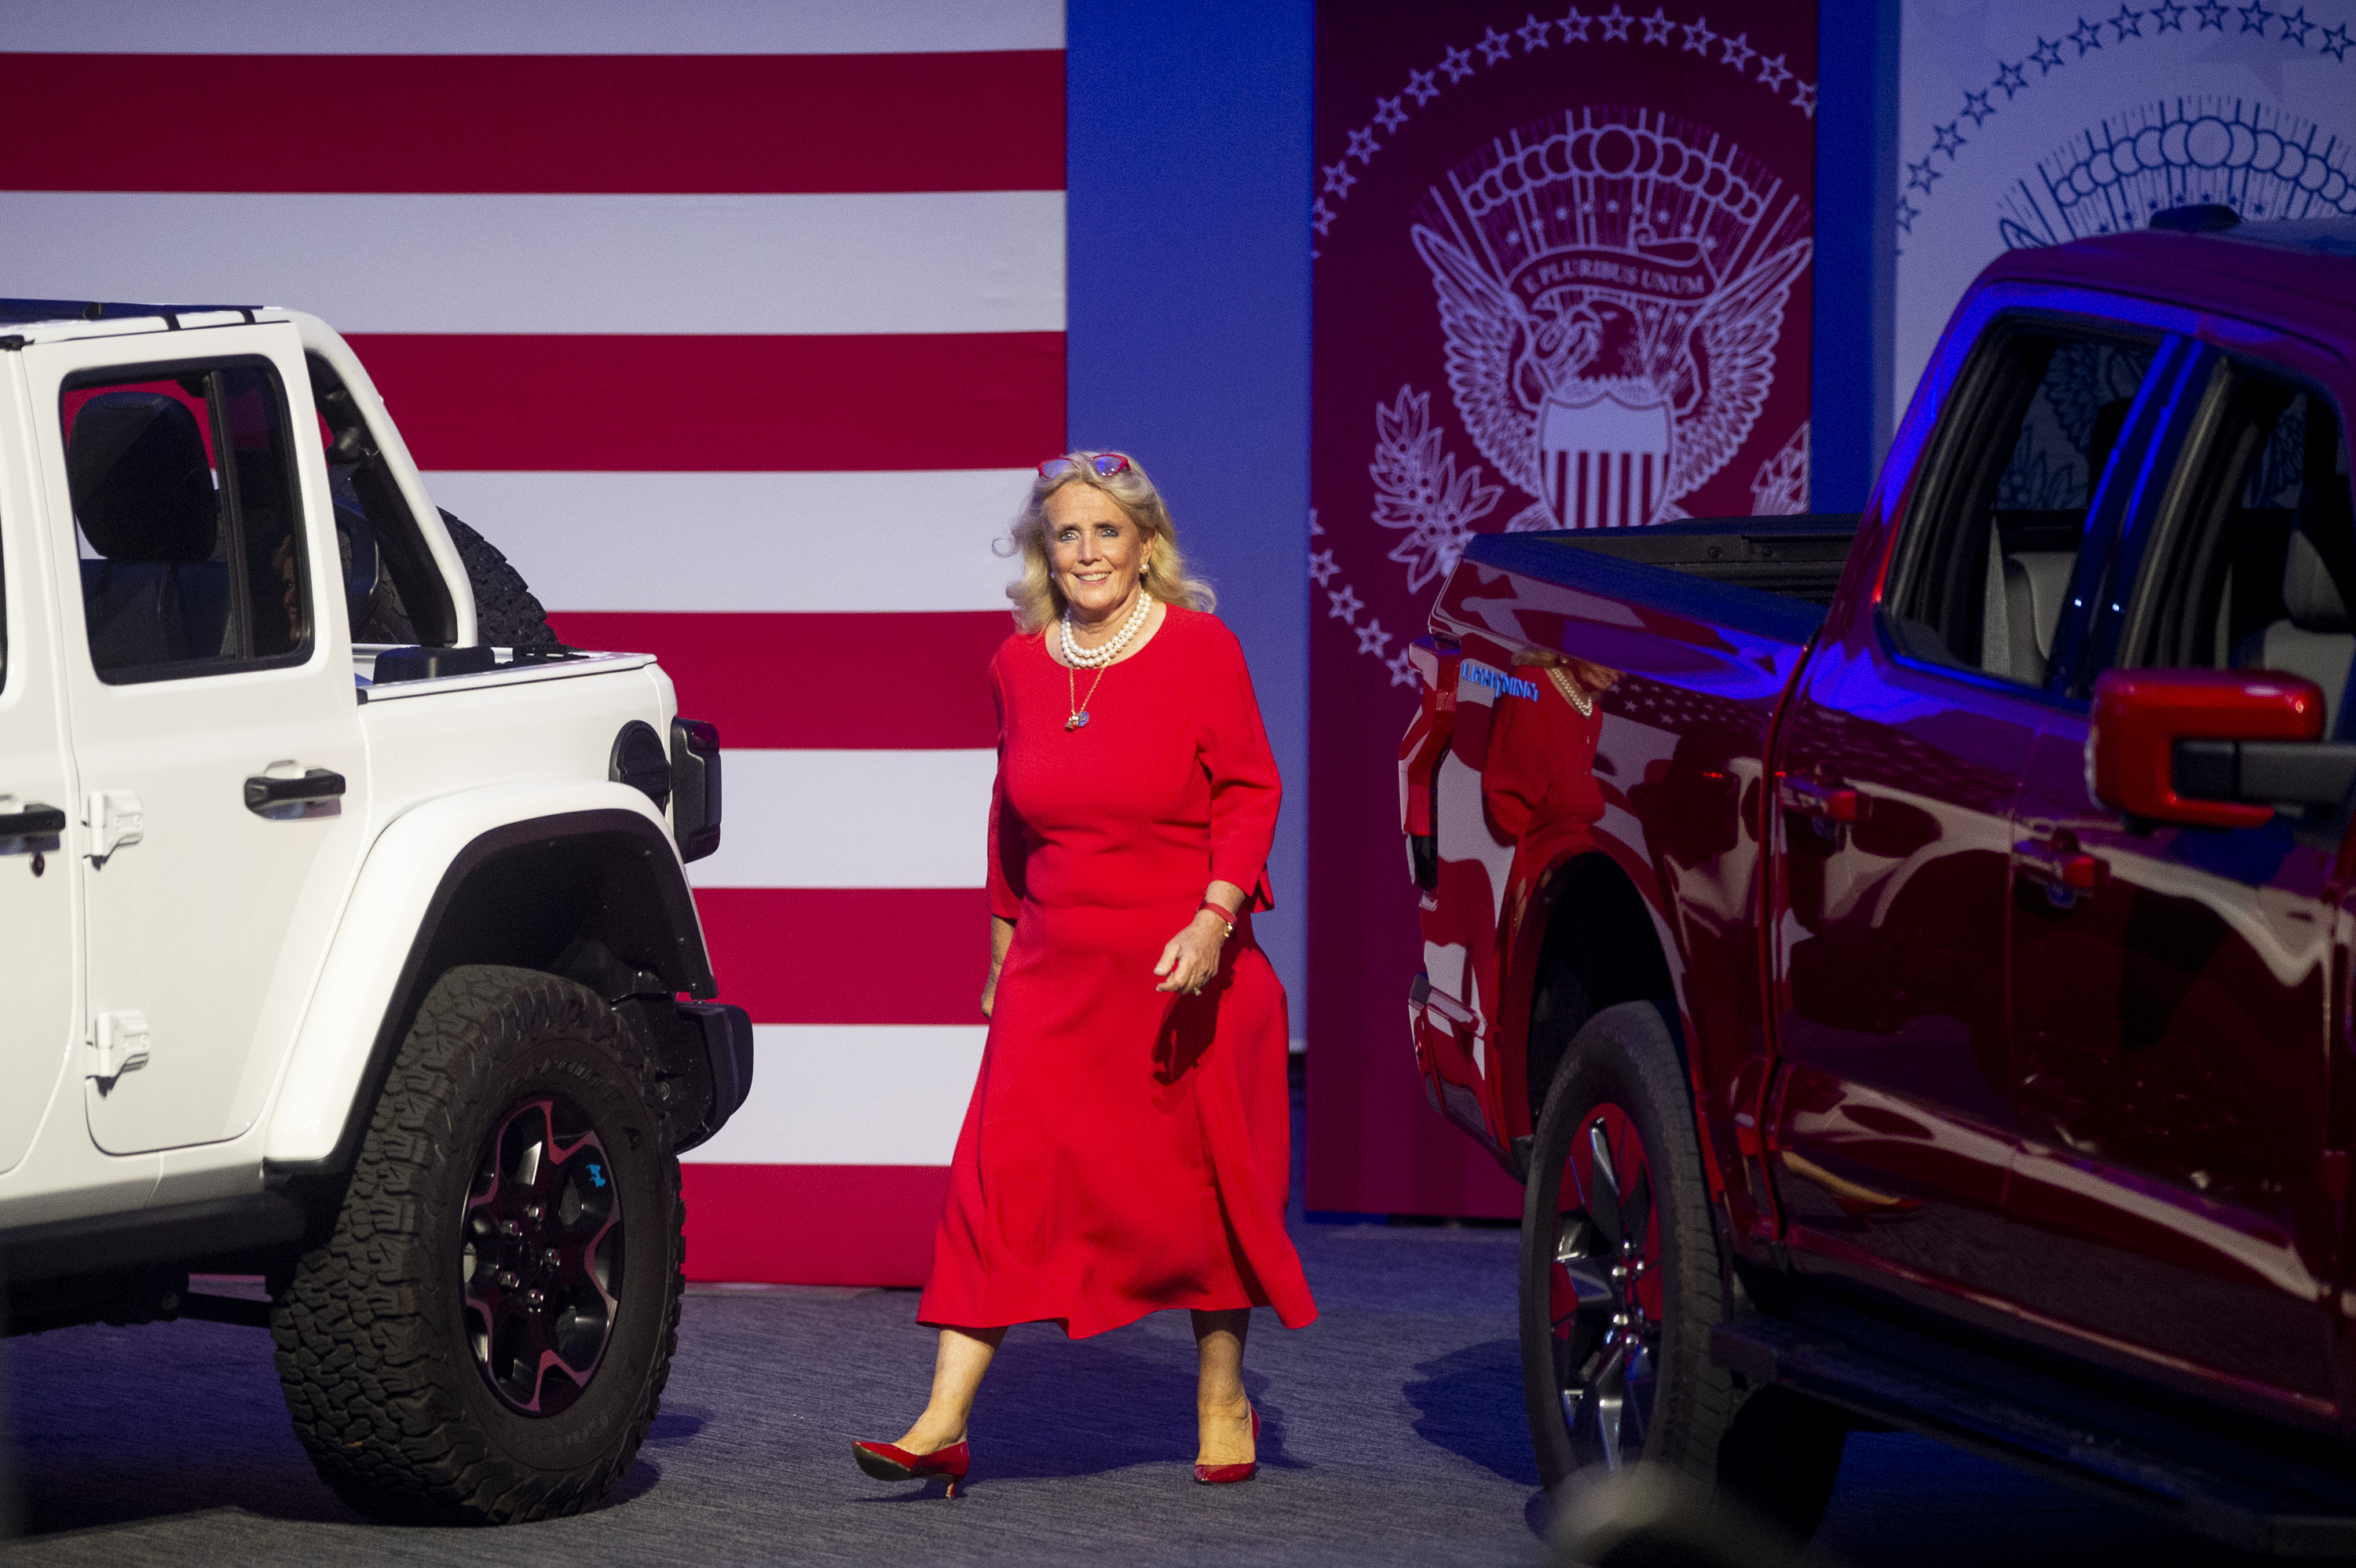 U.S. Rep. Debbie Dingell, D-Ann Arbor, speaks during the 2022 North American International Auto Show at Huntington Place in Detroit on Wednesday, Sept. 14 2022.